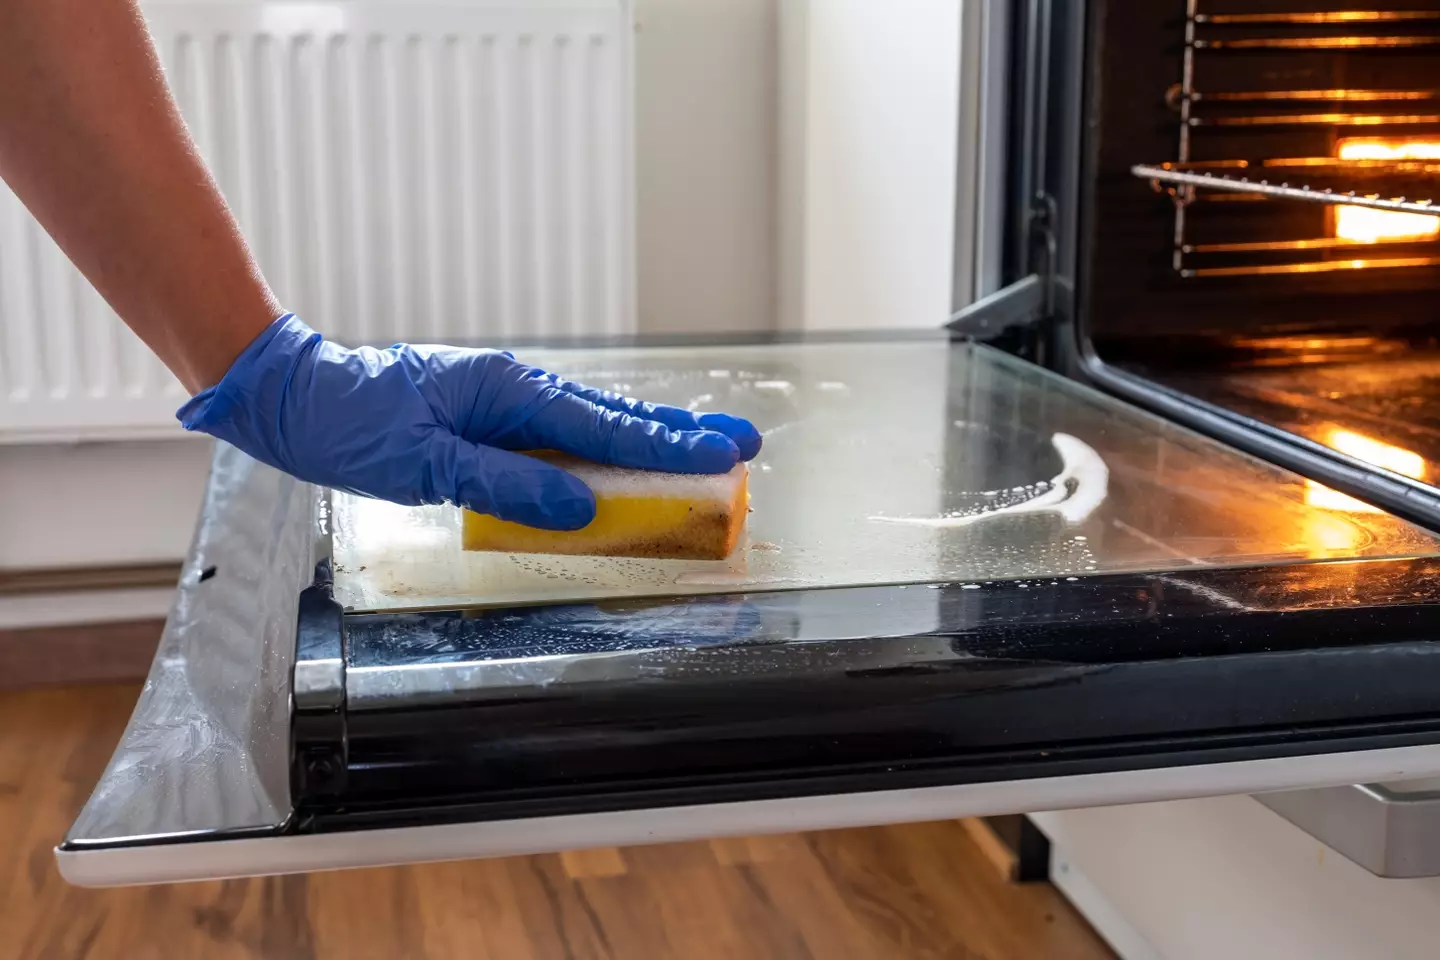 Earlier this week we told you how to easily clean your oven door (